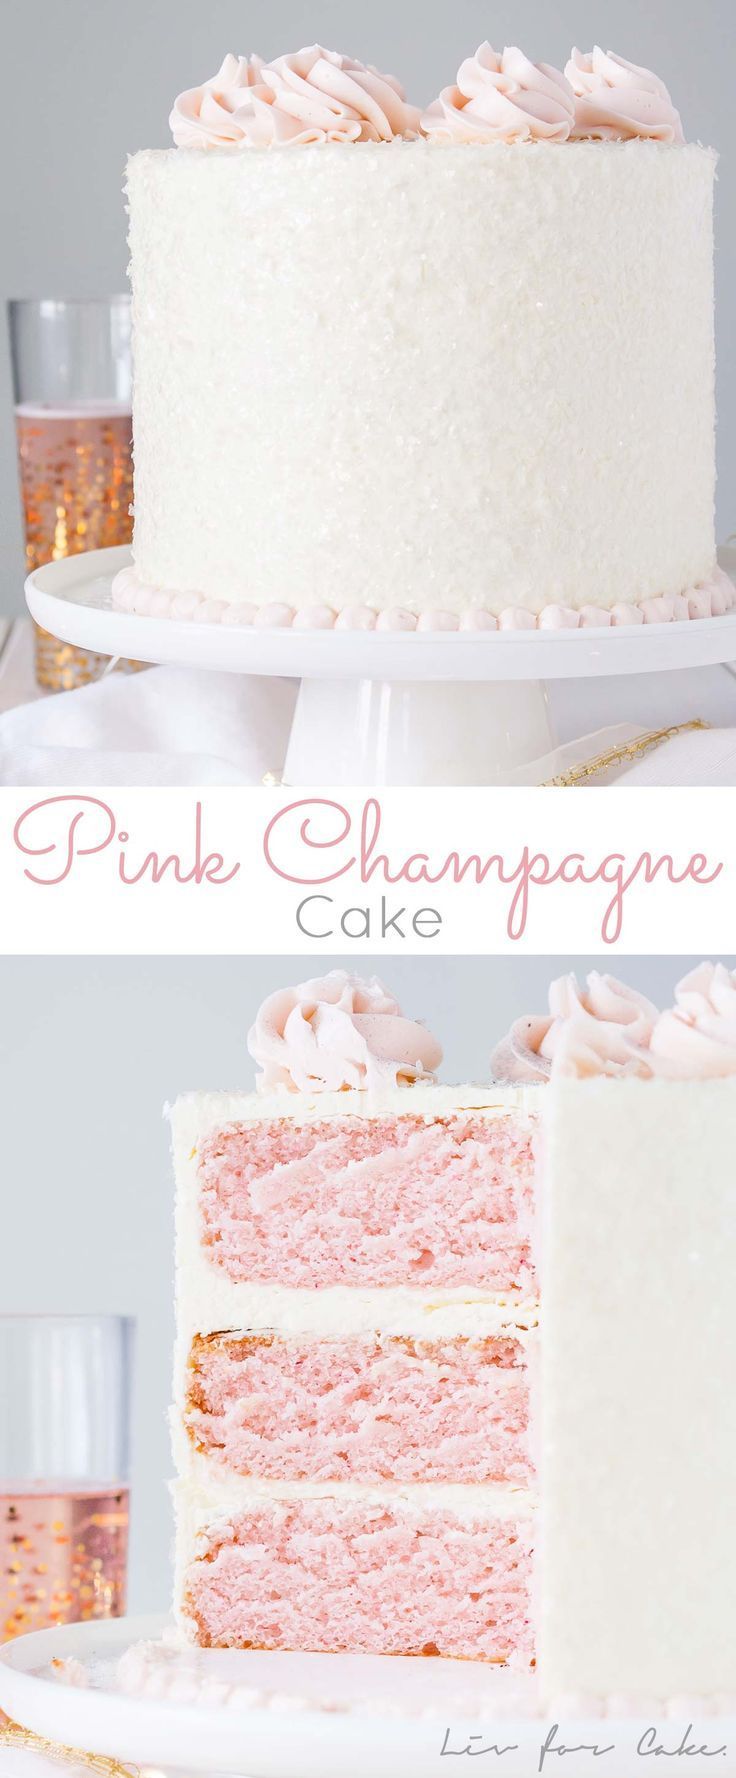 This Pink Champagne Cake is the perfect way to celebrate any occasion or holiday!